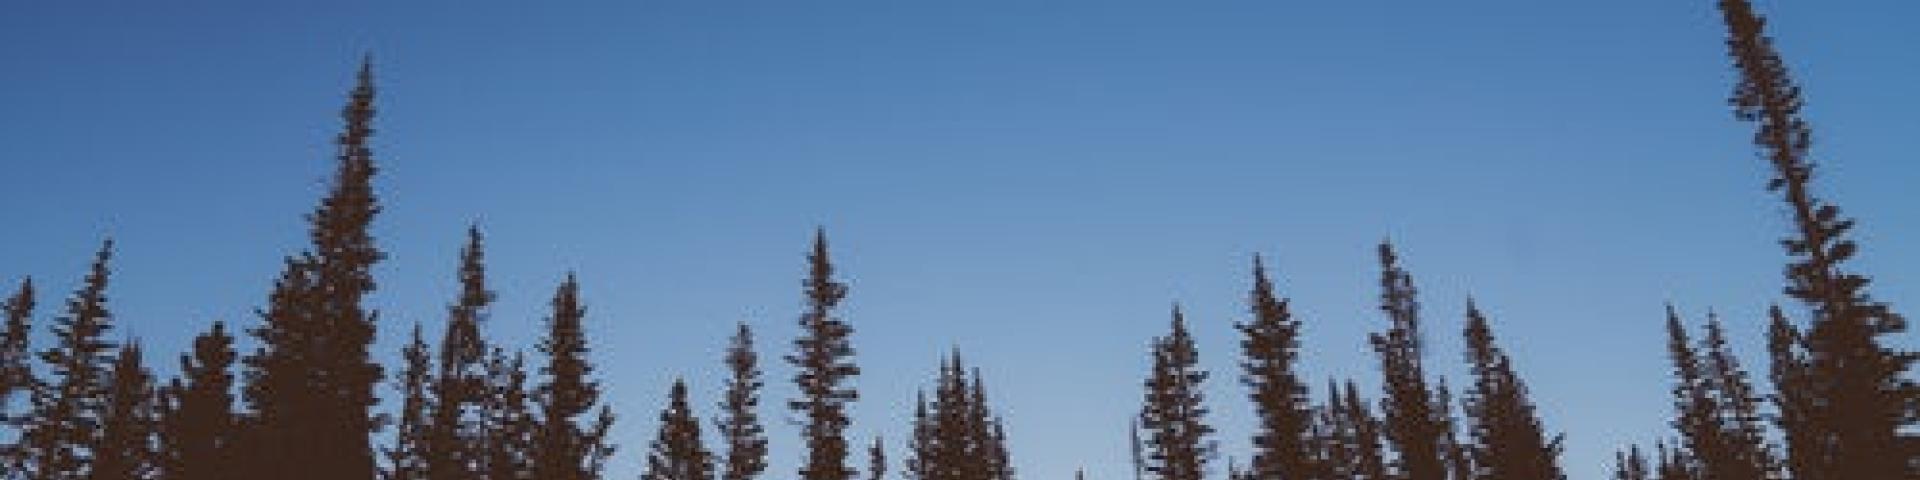 The silhouette of pine trees with blue sky in the background 